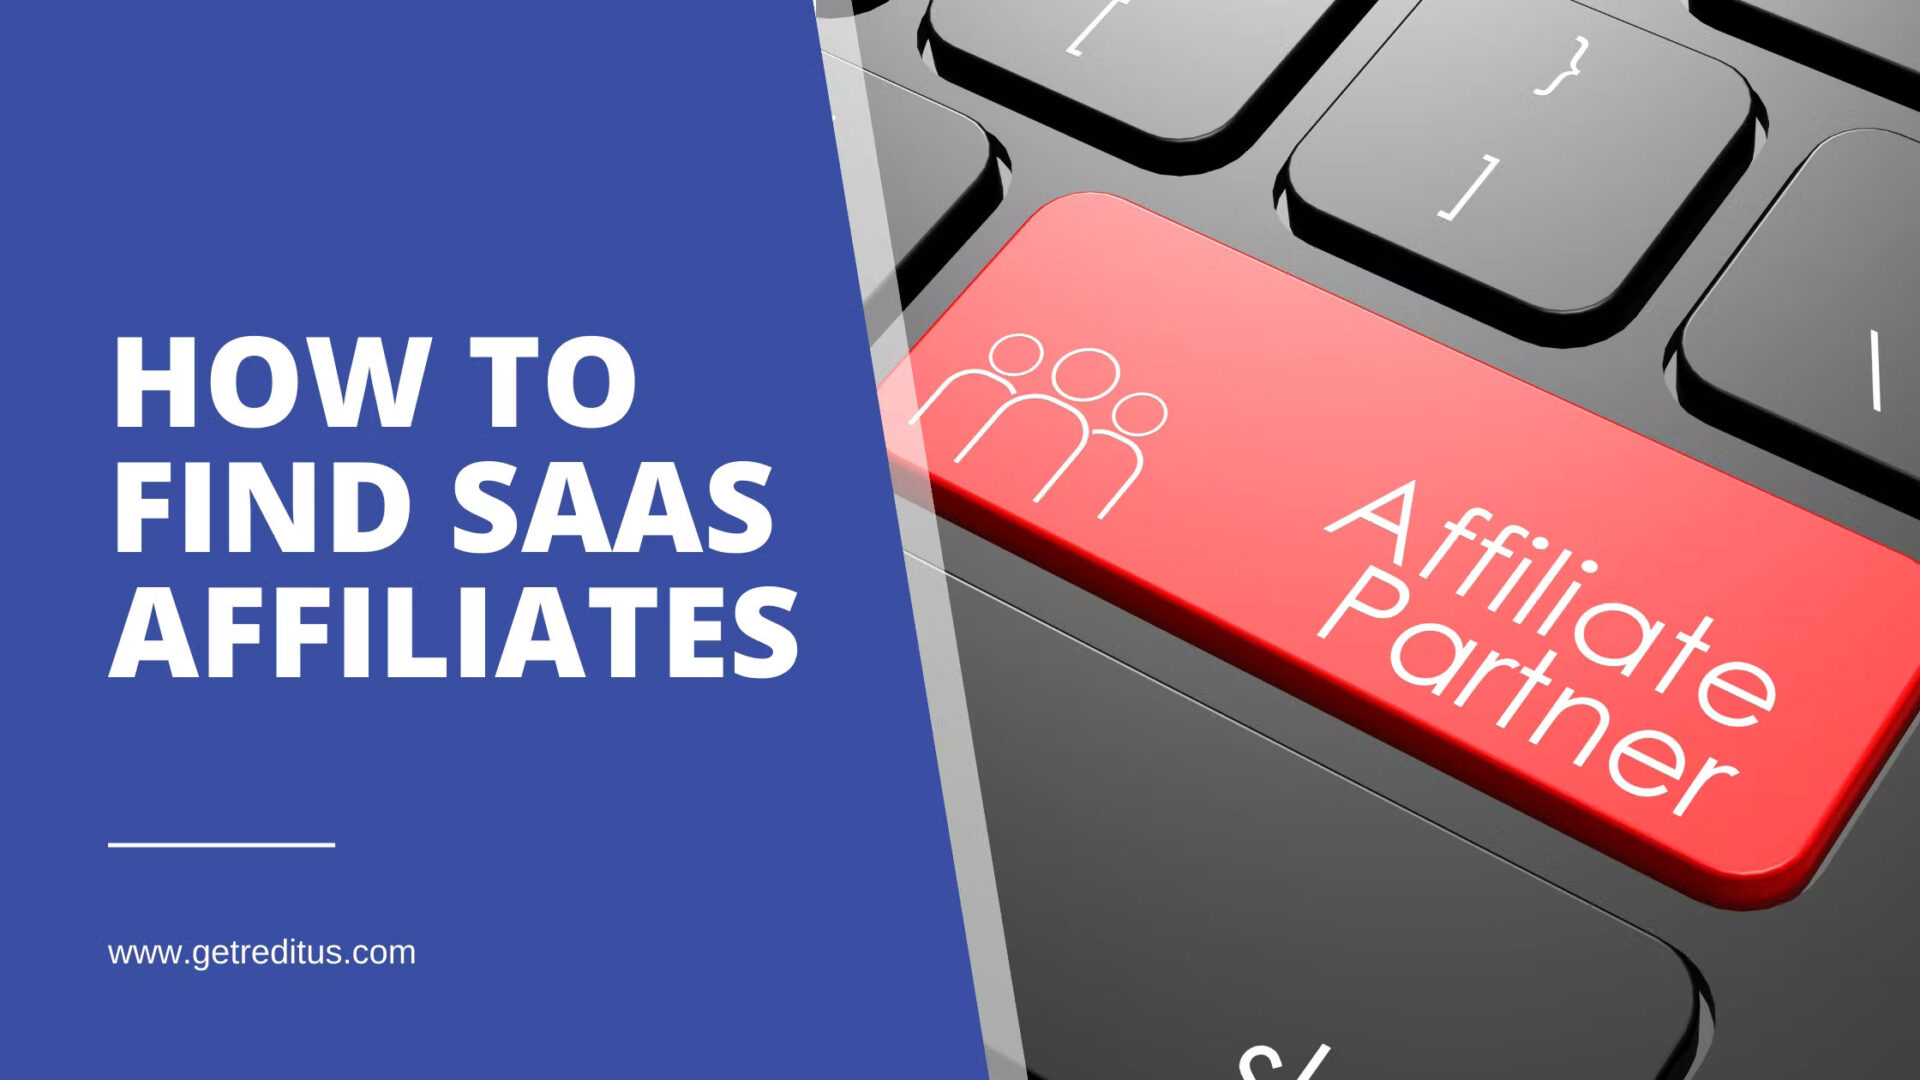 How to find affiliates for your SaaS?